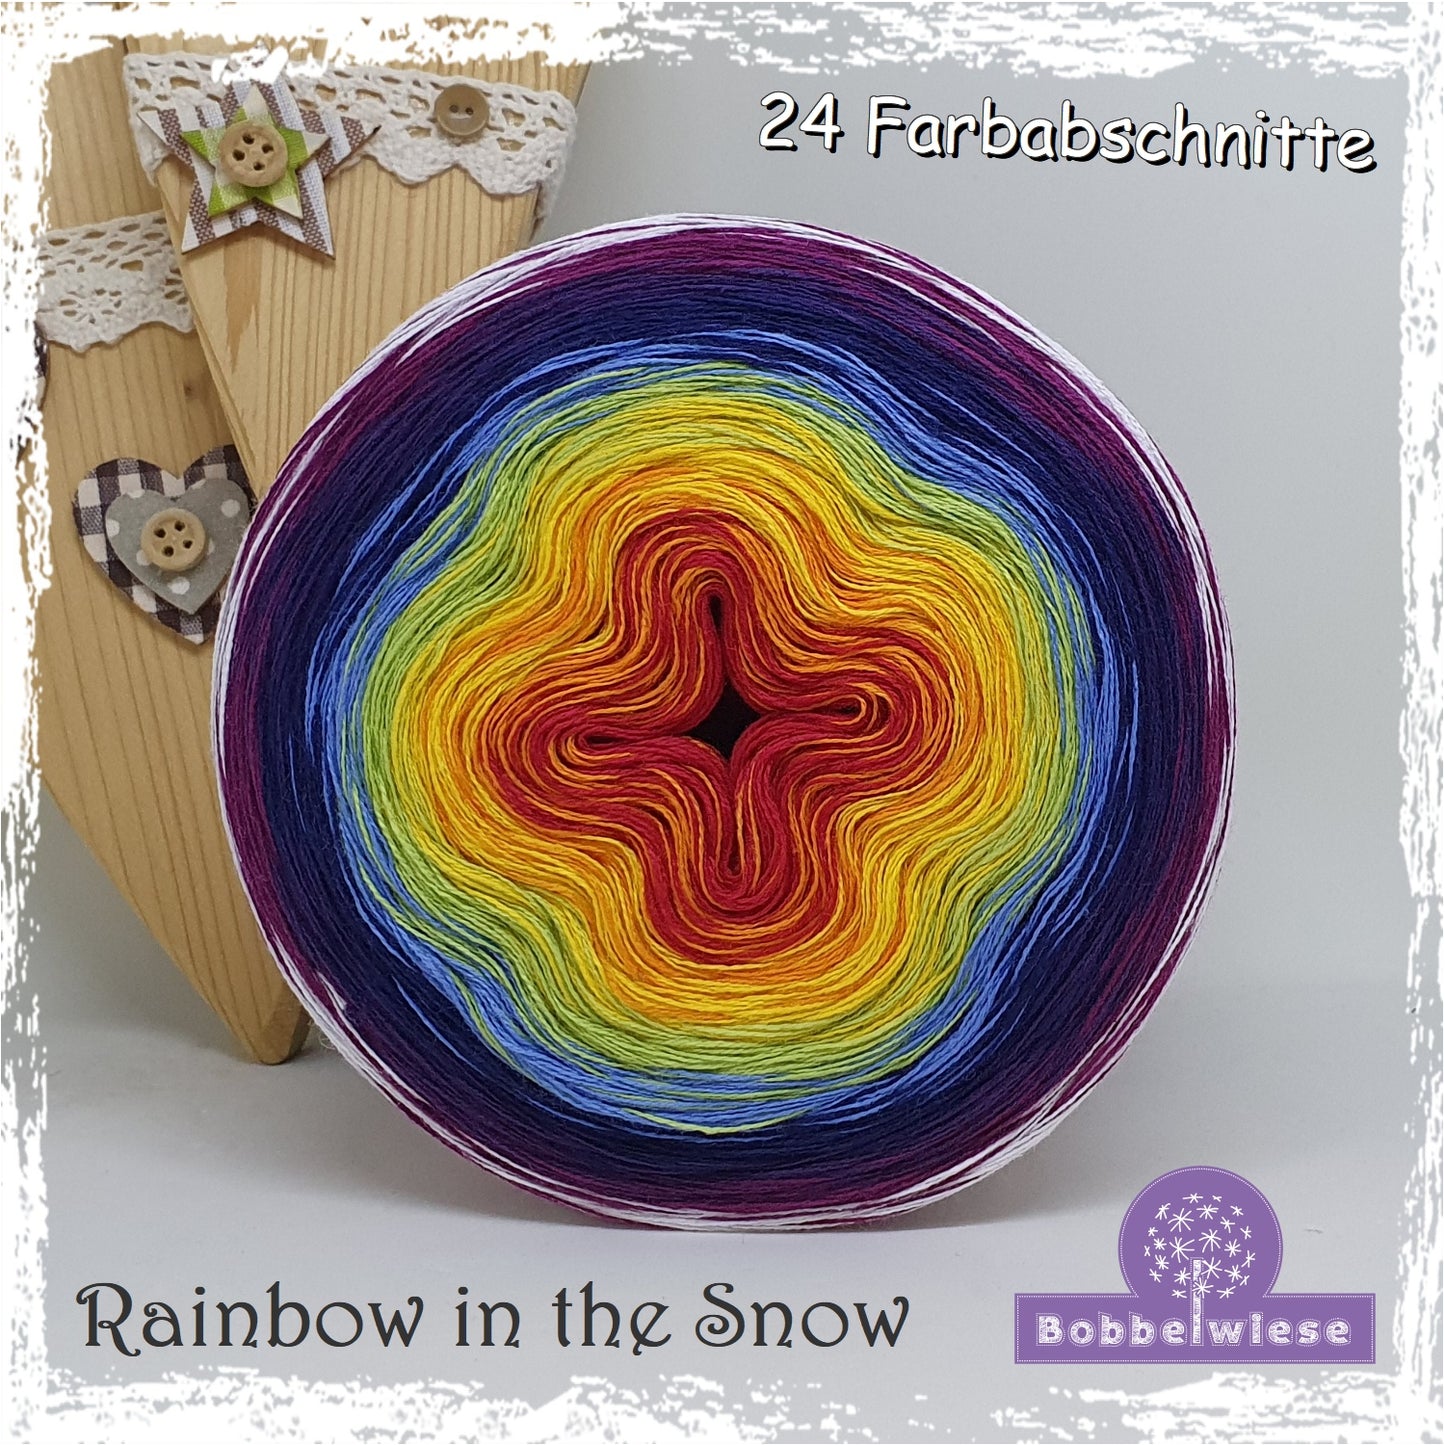 Bobbel "Rainbow in the Snow", 24 Farbabschnitte, 4fädig